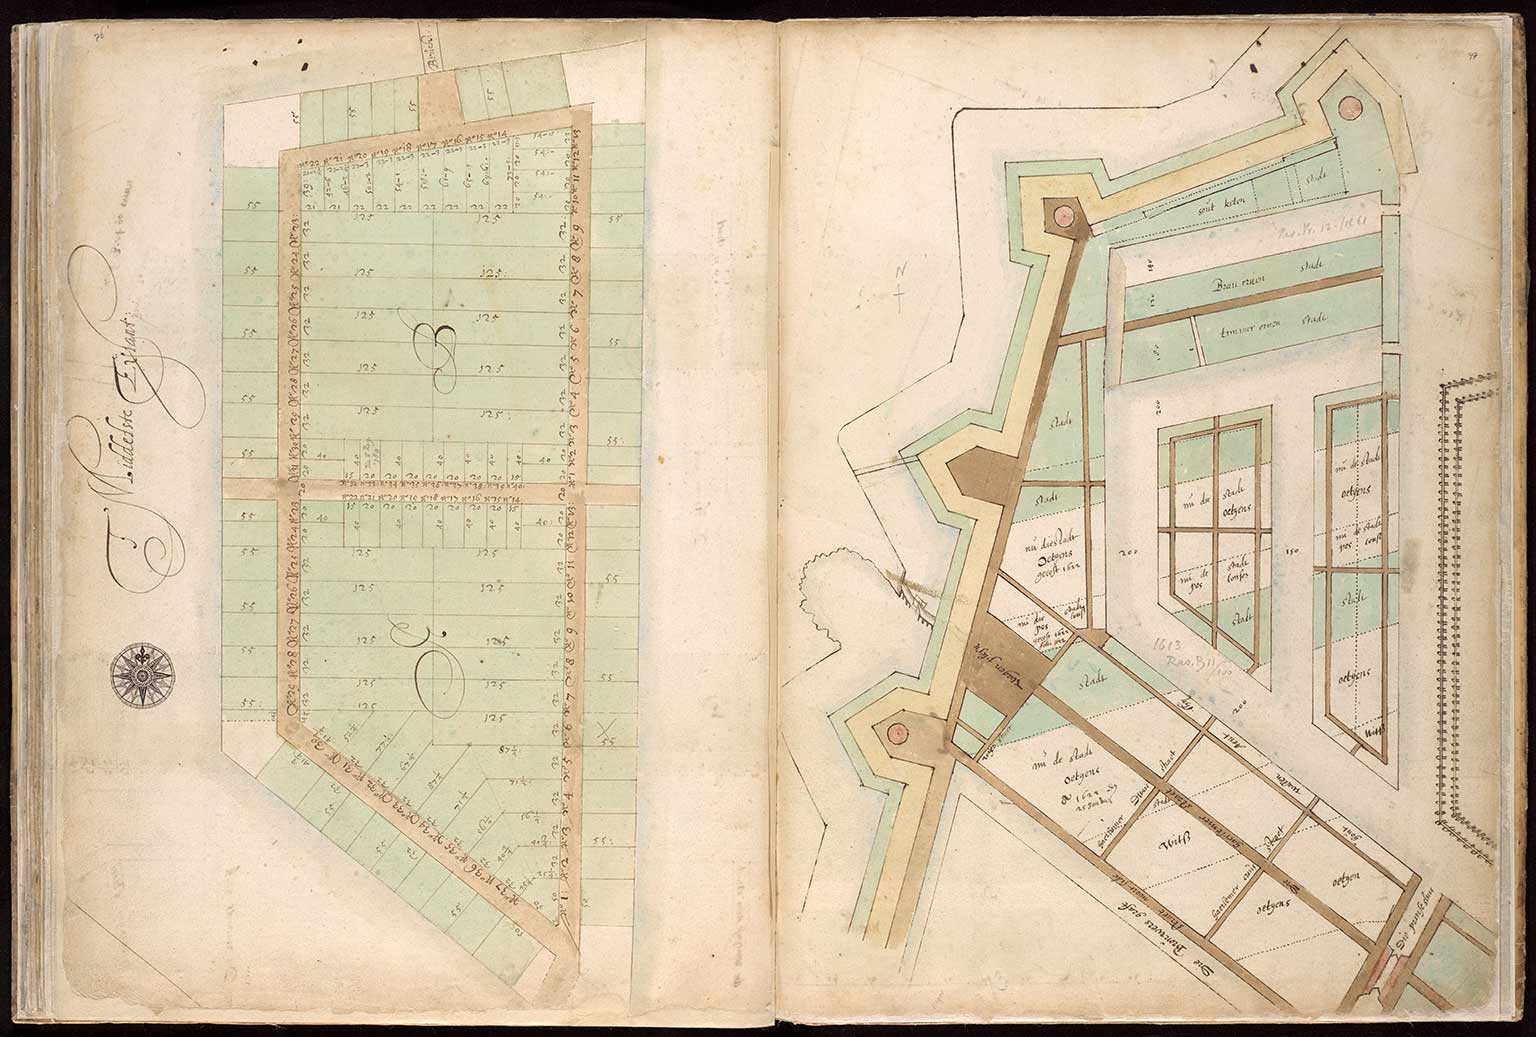 Two cadastral drawings from 1623 and 1622 with measured and numbered lots on Prinseneiland, Amsterdam